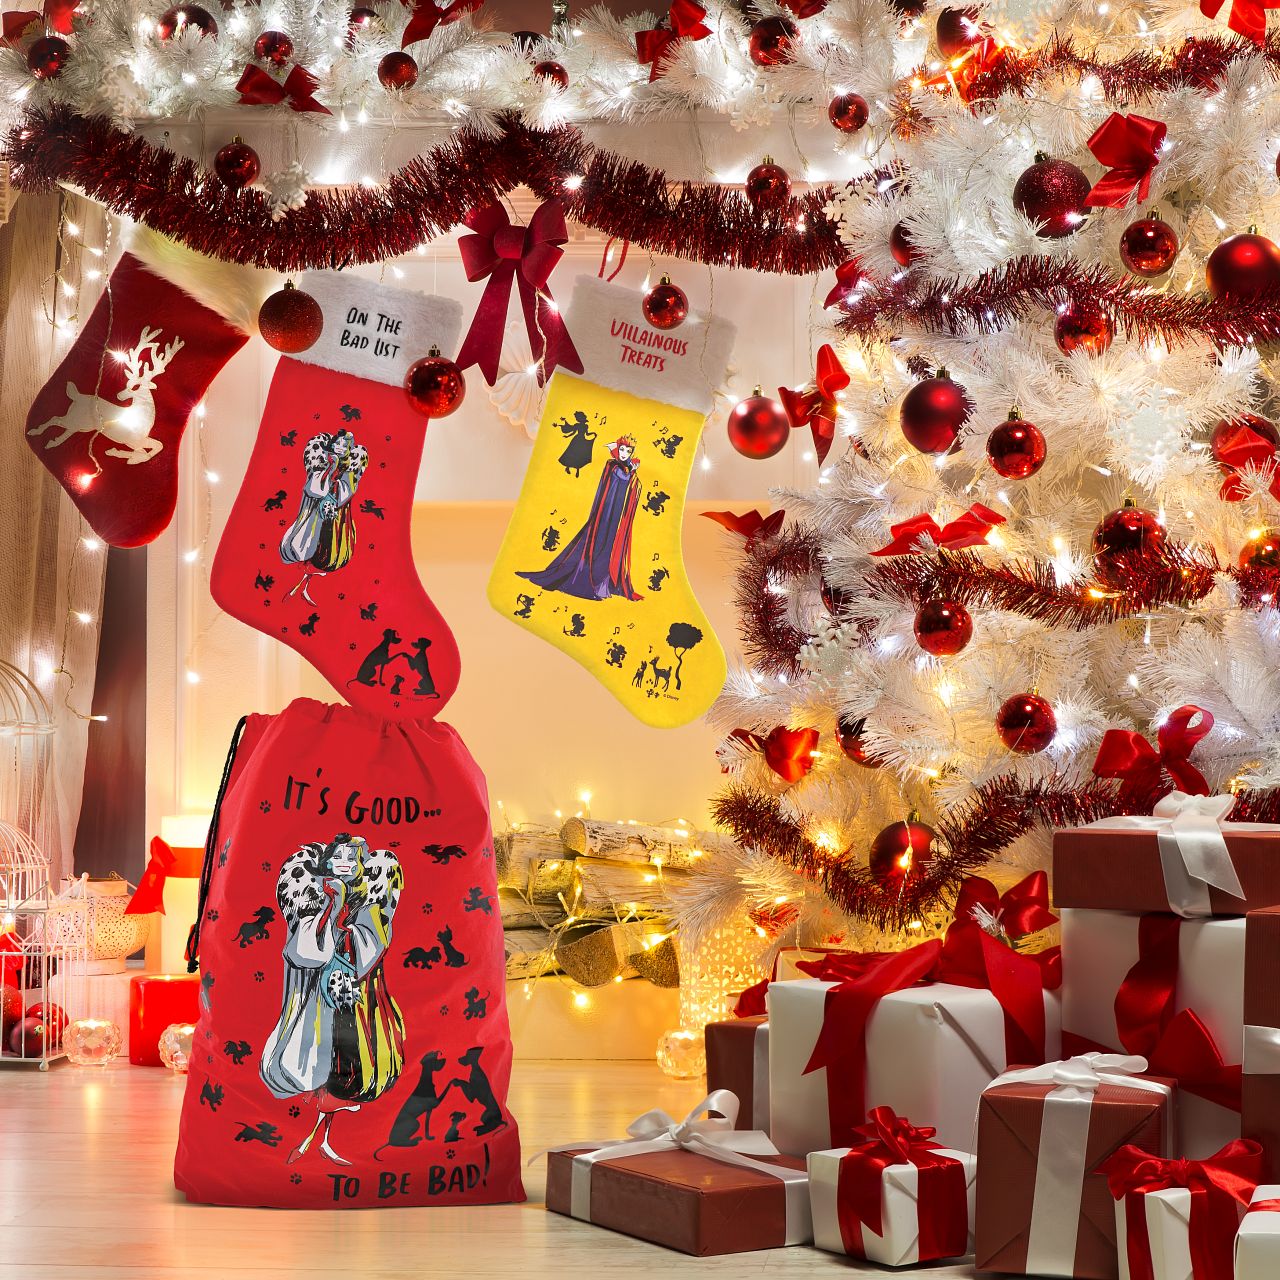 Disney 101 Dalmatians On The Bad List Cruella De Vil Stocking  Do you know anyone on Santa's bad list this year? Cruella De vil from Disney's classic 101 Dalmatians is certainly wicked enough not to make the good list. This unique Christmas stocking will make a great traditional gift, which can be enjoyed year after year.